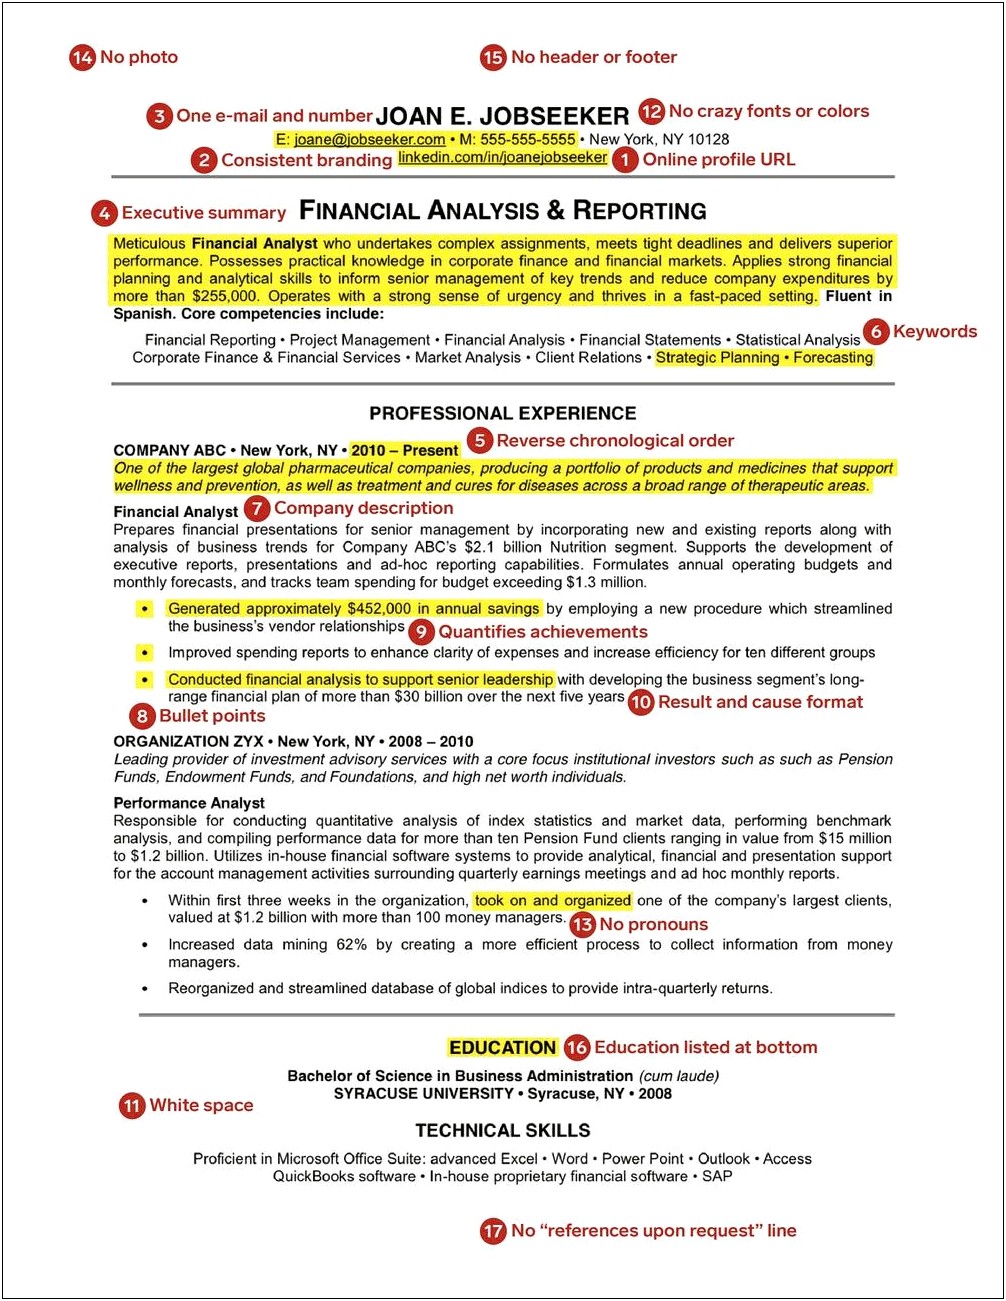 Words And Phrases To Avoid In Resume